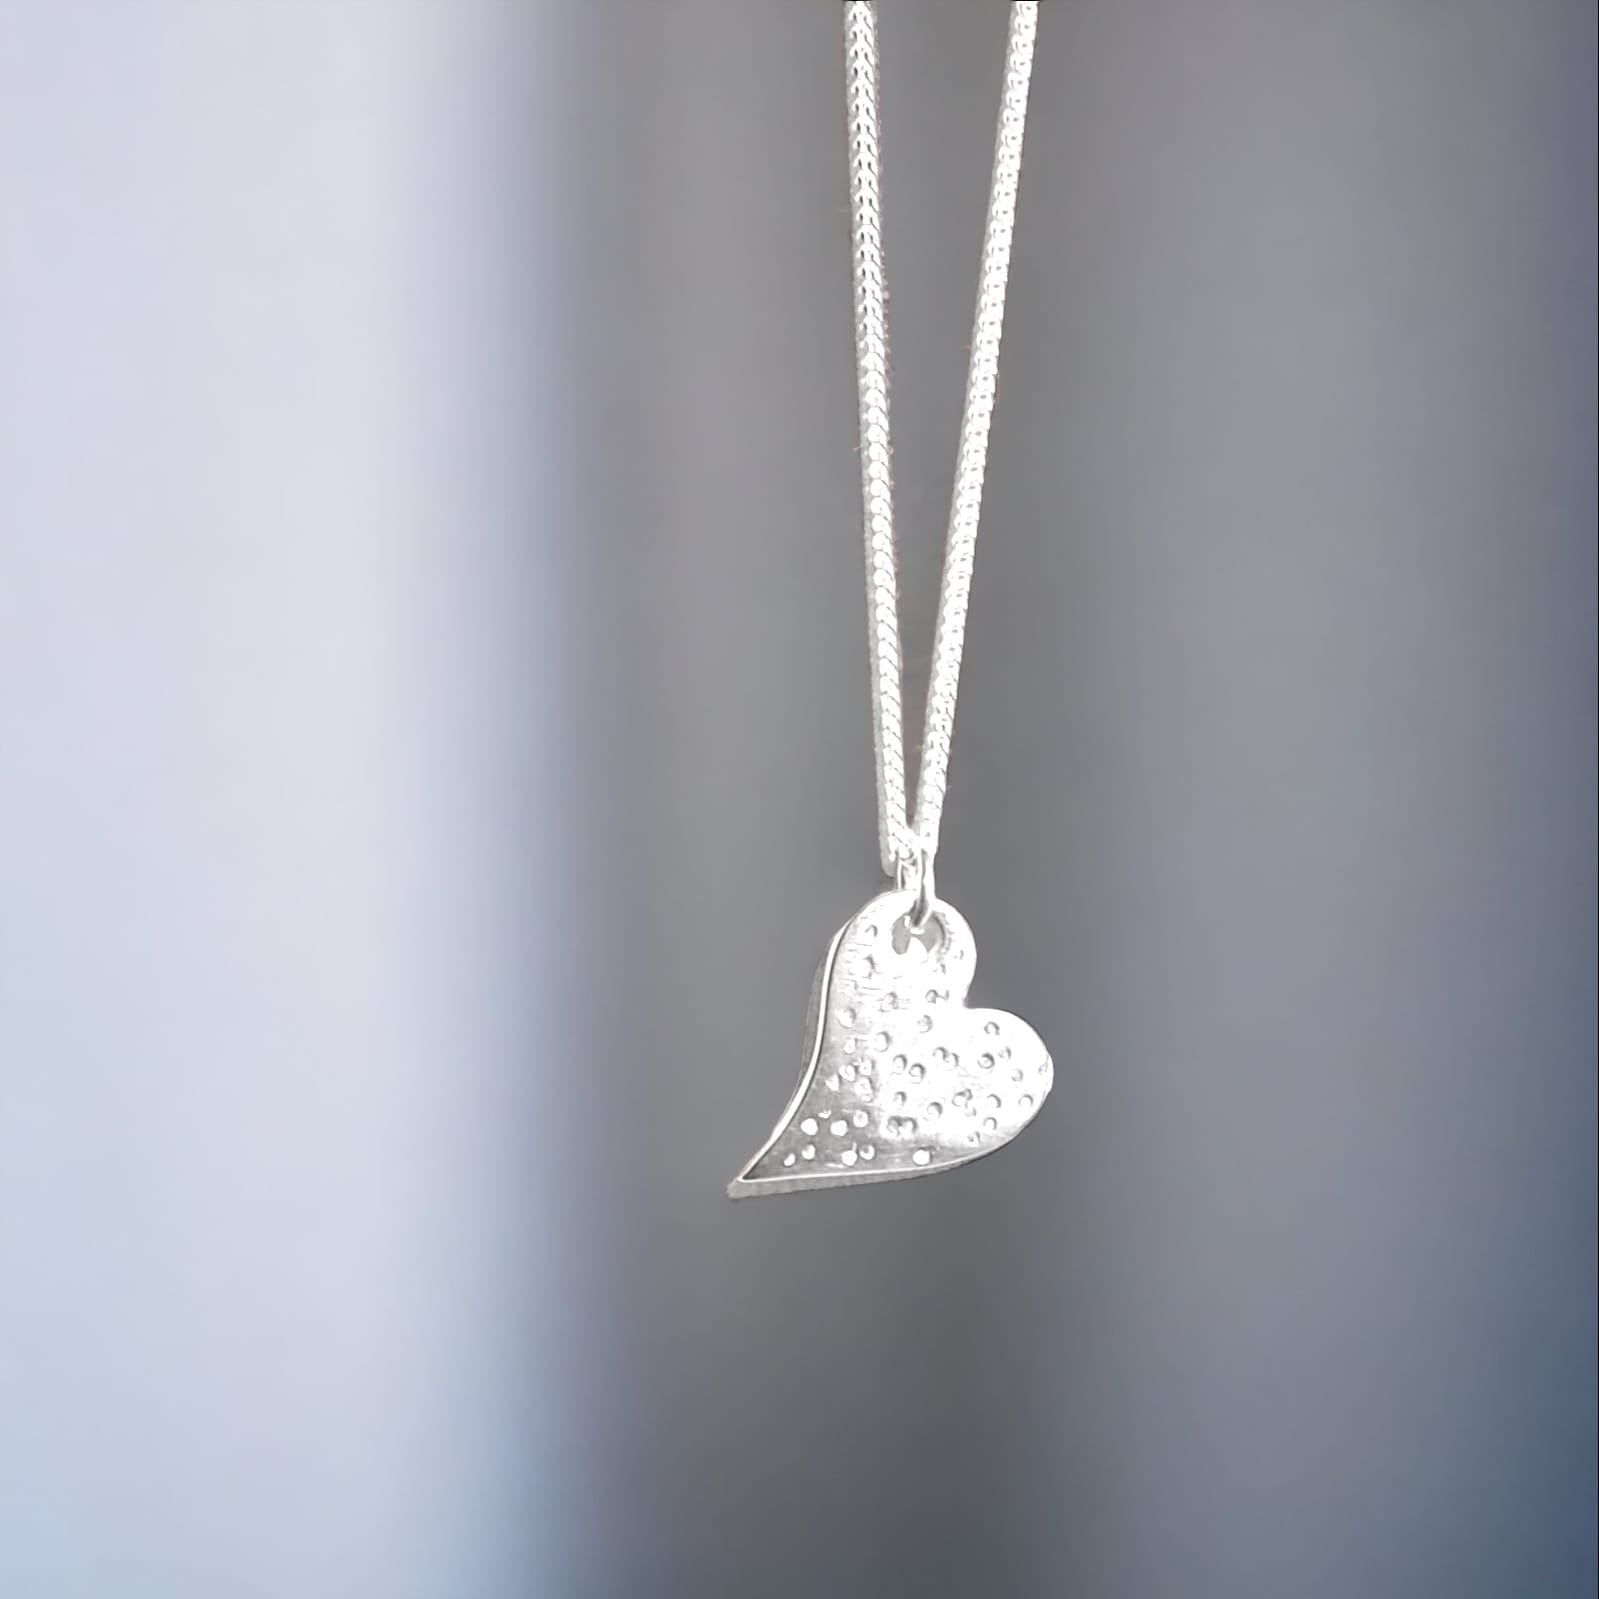 NEW- SK -  Home is where the heart is - stunning fine silver ashes pendant - 2-3 weeks - a special offer is in the menu